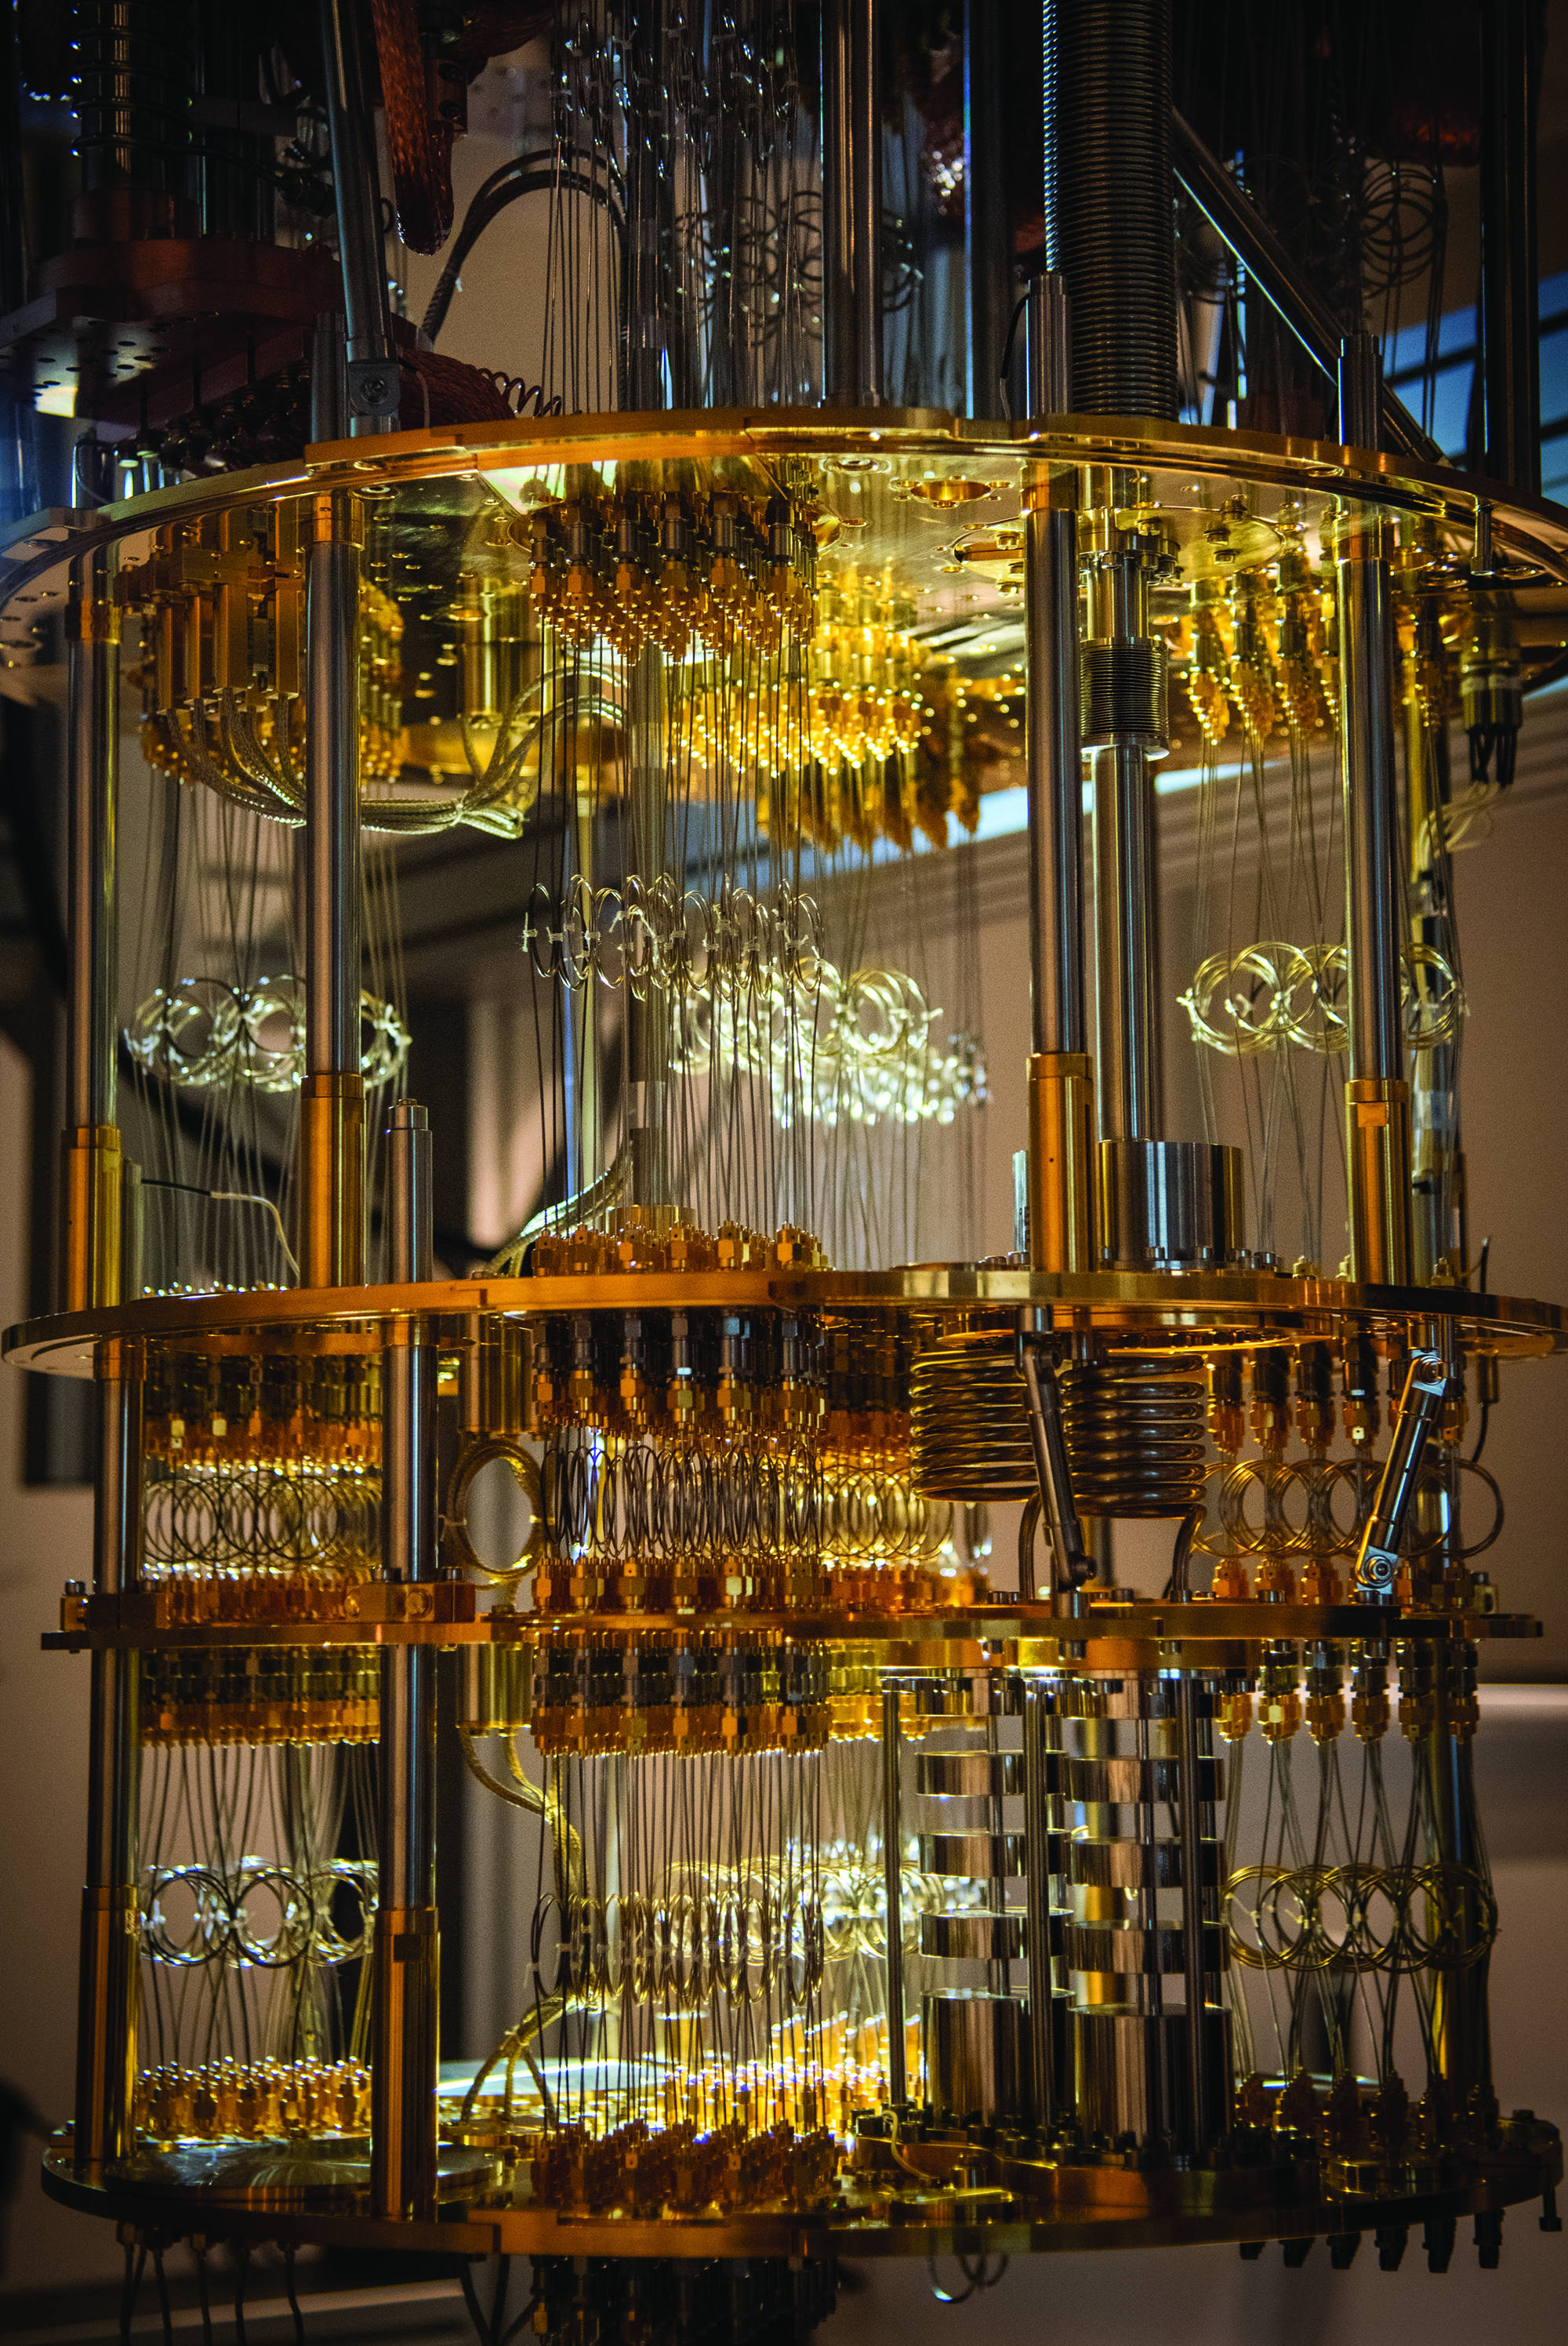 &lt;strong&gt;Figure 1.&lt;/strong&gt; This quantum computer at Lawrence Berkeley National Laboratory is exploring quantum’s potential to enable groundbreaking computational power. Figure courtesy of the University of California, Lawrence Berkeley National Laboratory.